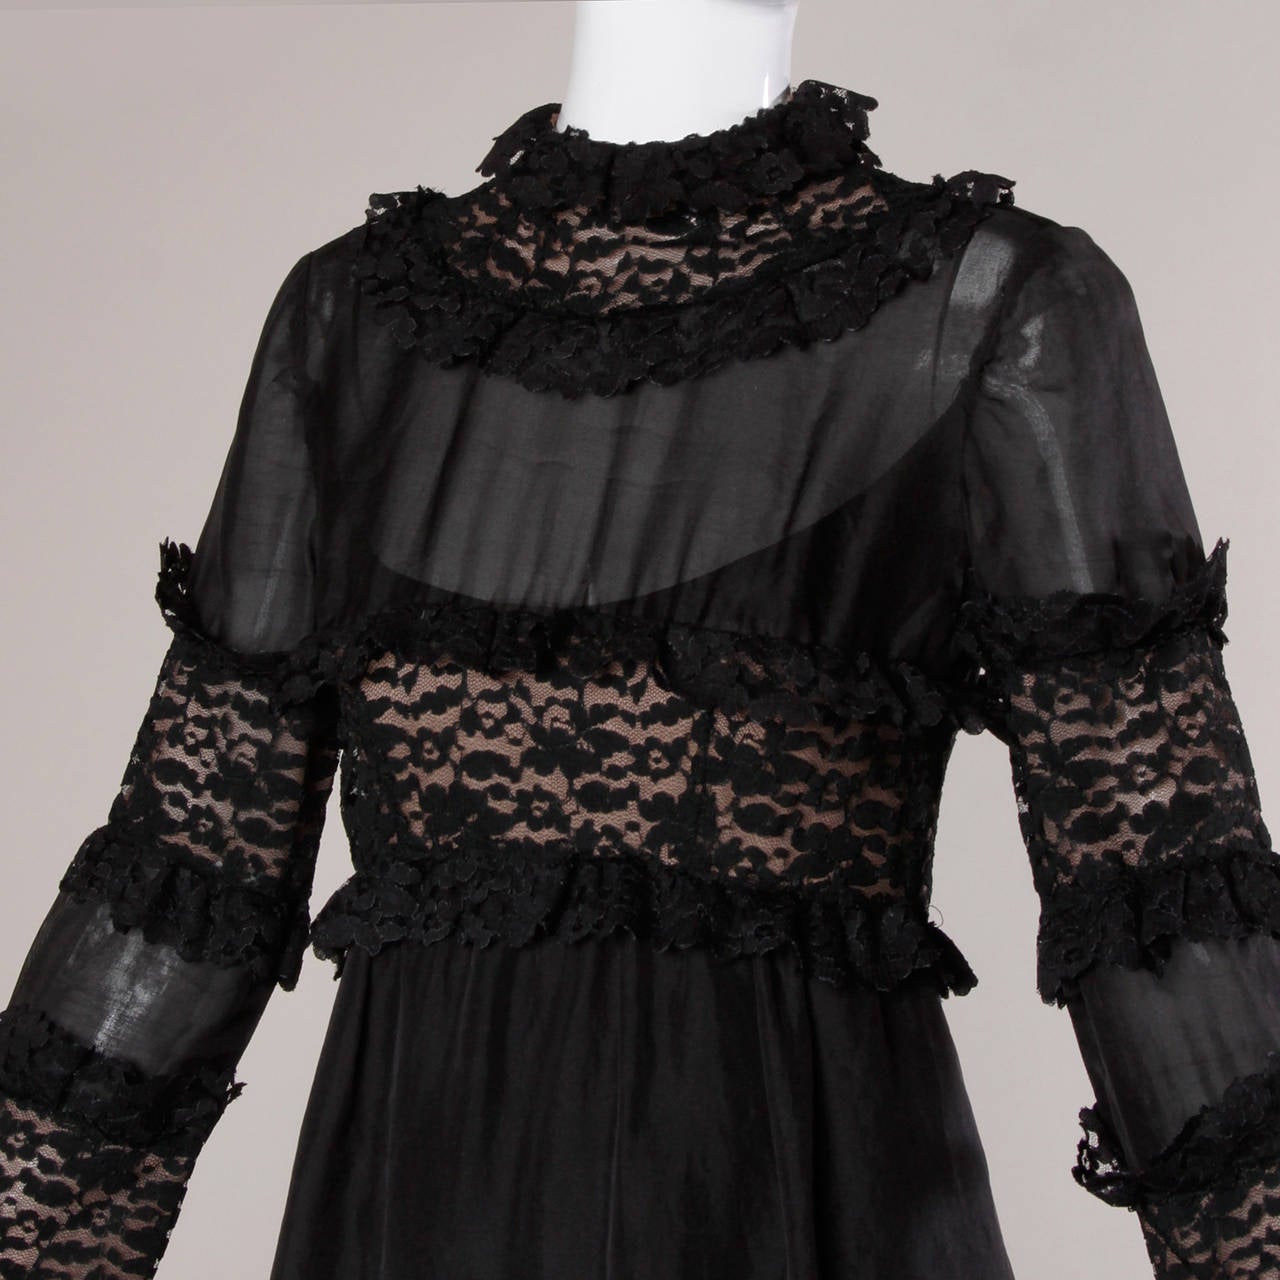 Incredible 1960s Victorian-inspired black lace dress by Ferdinando Sarmi. Nude illusion and sheer silk panels and lace ruffle trim. Couture construction with hand stitched details throughout the dress.

Details:

Partially Lined
Back Button